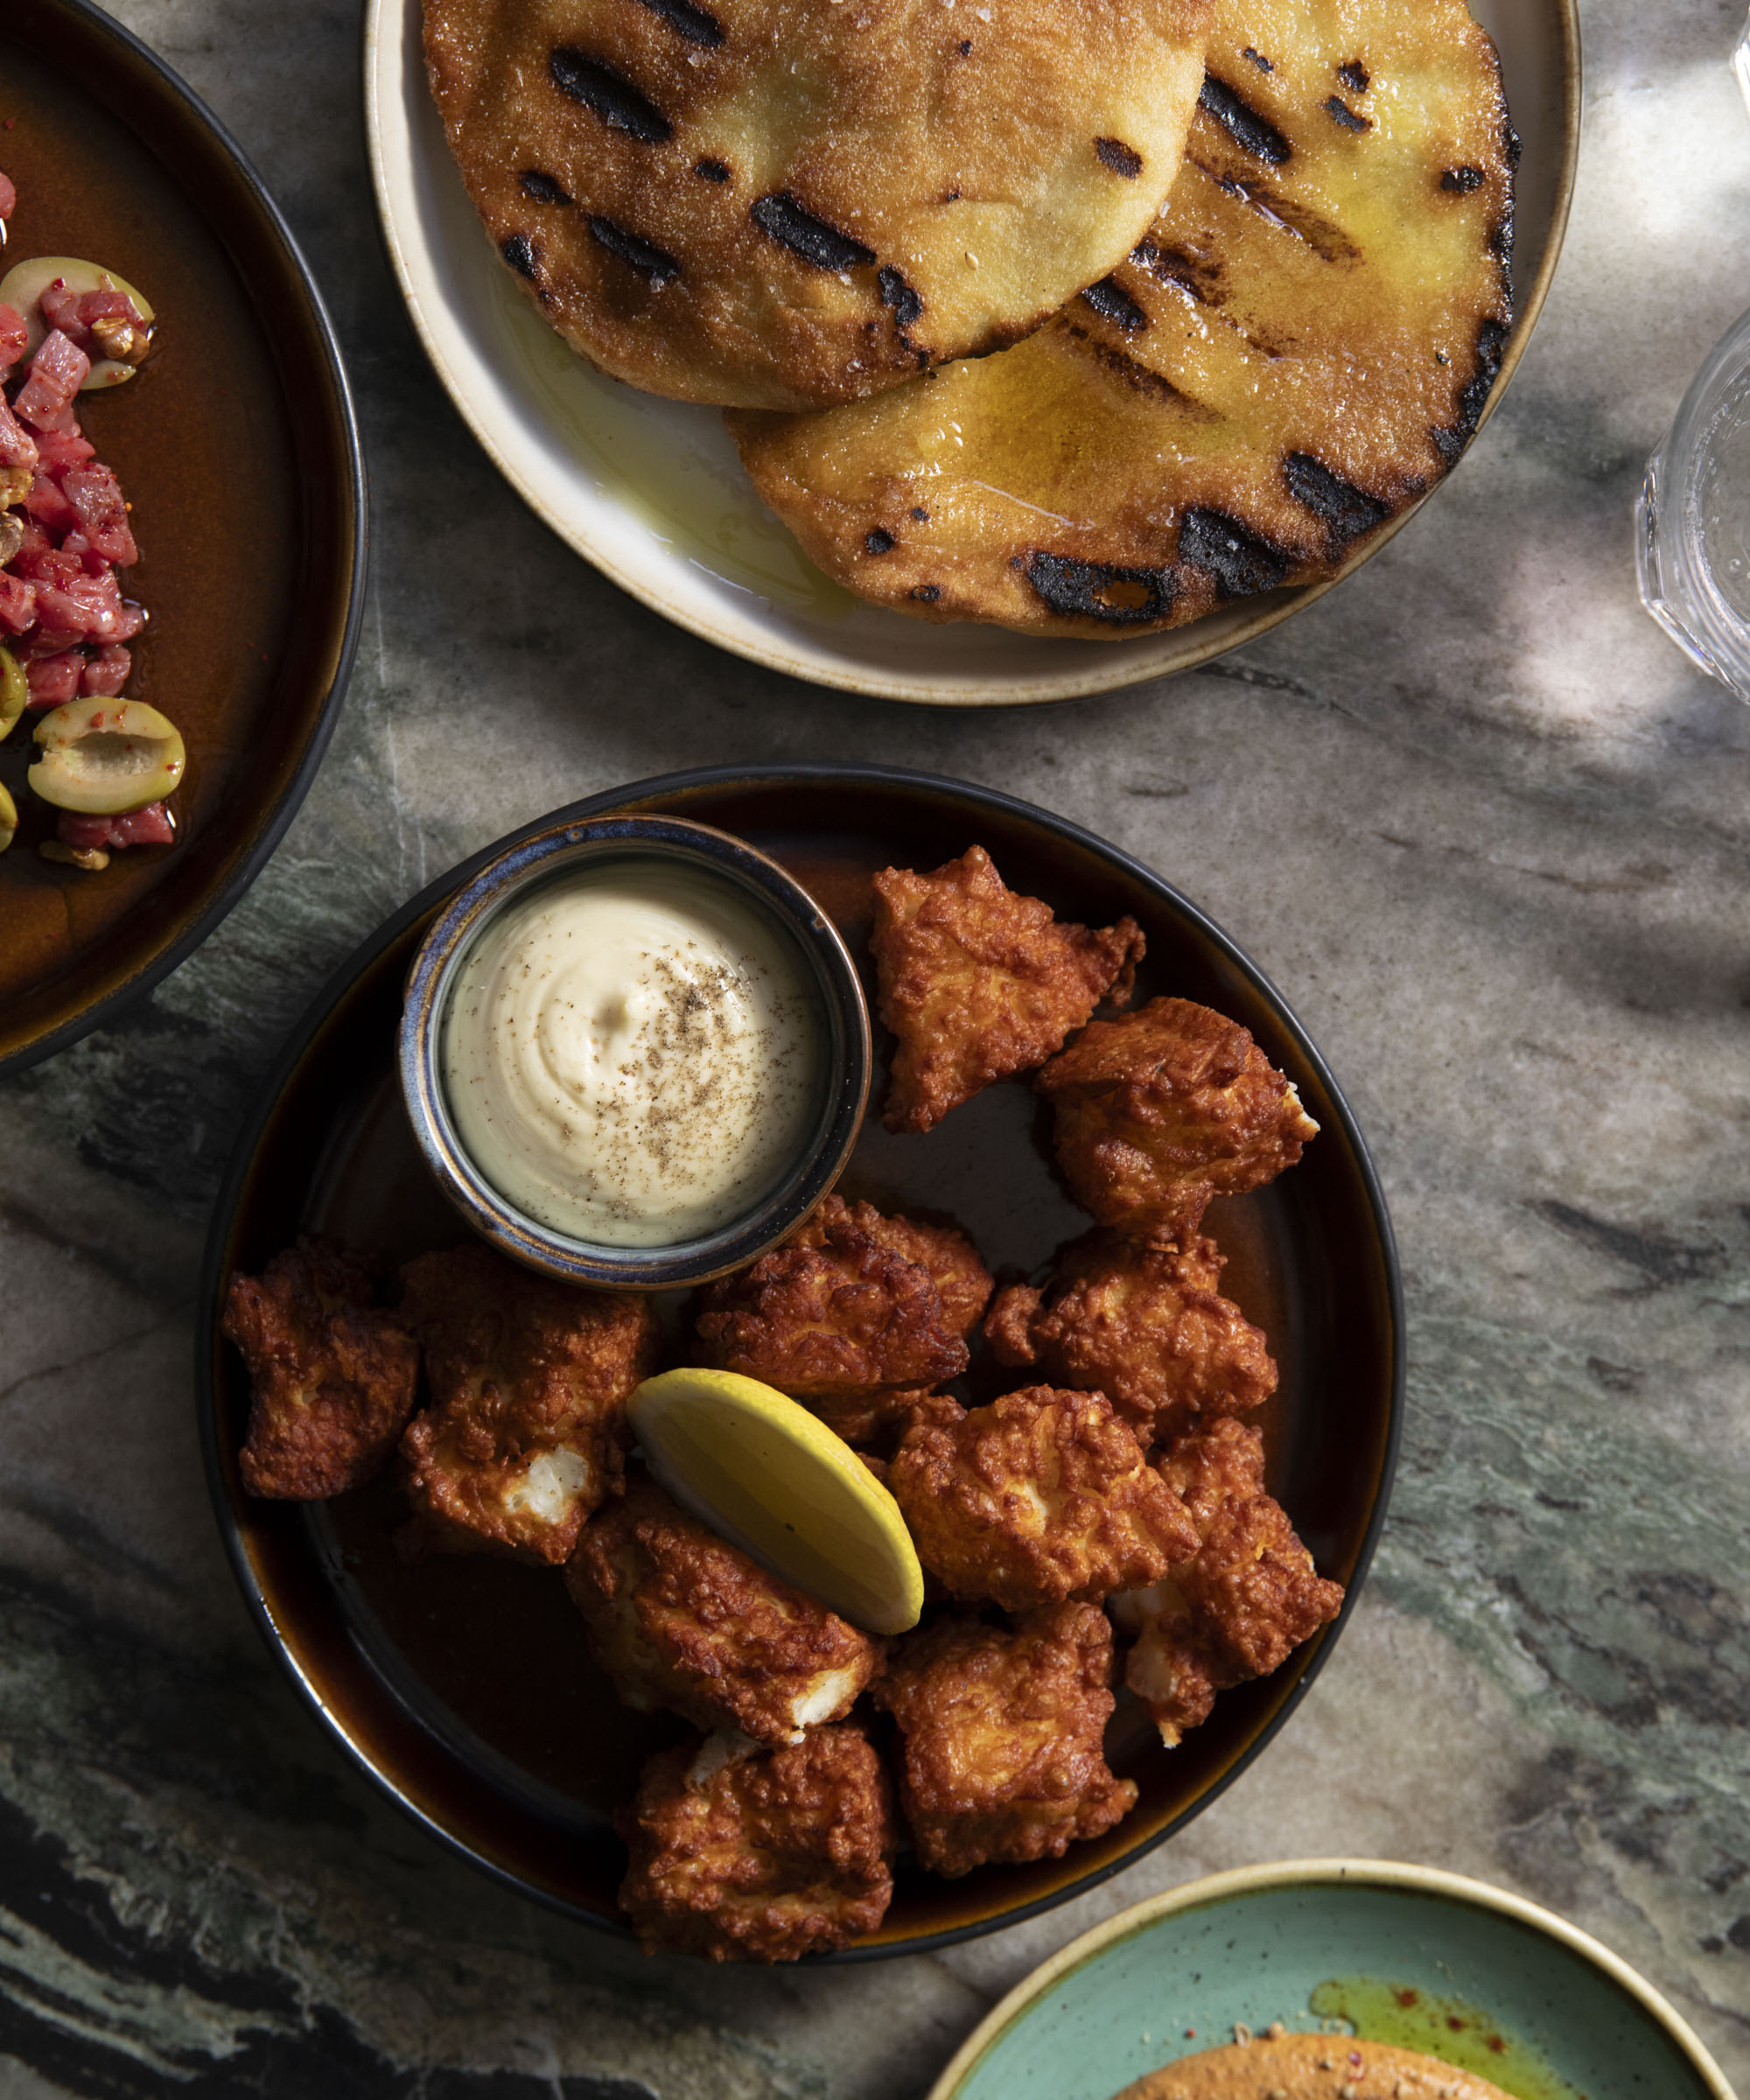 8-course menu at Yaffa in City Center – They’ve brought new life to the Gråbrødretorv food scene with a modern take on Middle Eastern cuisine